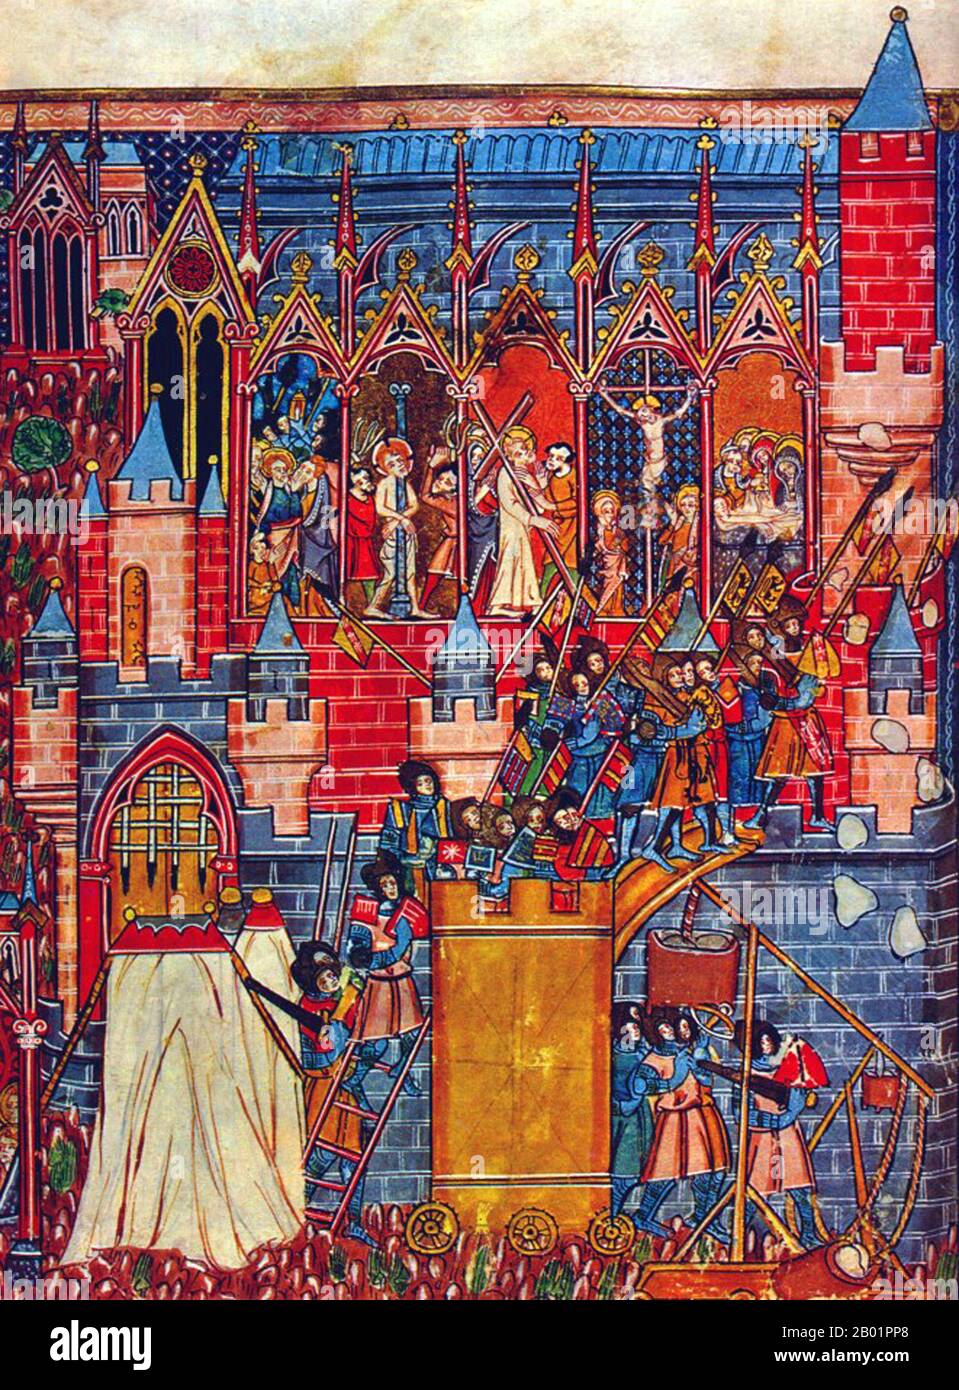 Palestine: The Siege of Jerusalem during the First Crusade (7 June - 15 July 1099). Miniature painting by Guillaume de Tyr/William of Tyre (1130 - 29 September 1186) from a copy of the Histoire d'Outremer, c. 13th century.  The Siege of Jerusalem took place from June 7 to July 15, 1099 during the First Crusade. The Crusaders stormed and captured the city from Fatimid Egypt.  Throughout the siege, attacks were made on the walls, but each one was repulsed. The Genoese troops, led by commander Guglielmo Embriaco, had previously dismantled their ships and used the wood to make siege towers. Stock Photo